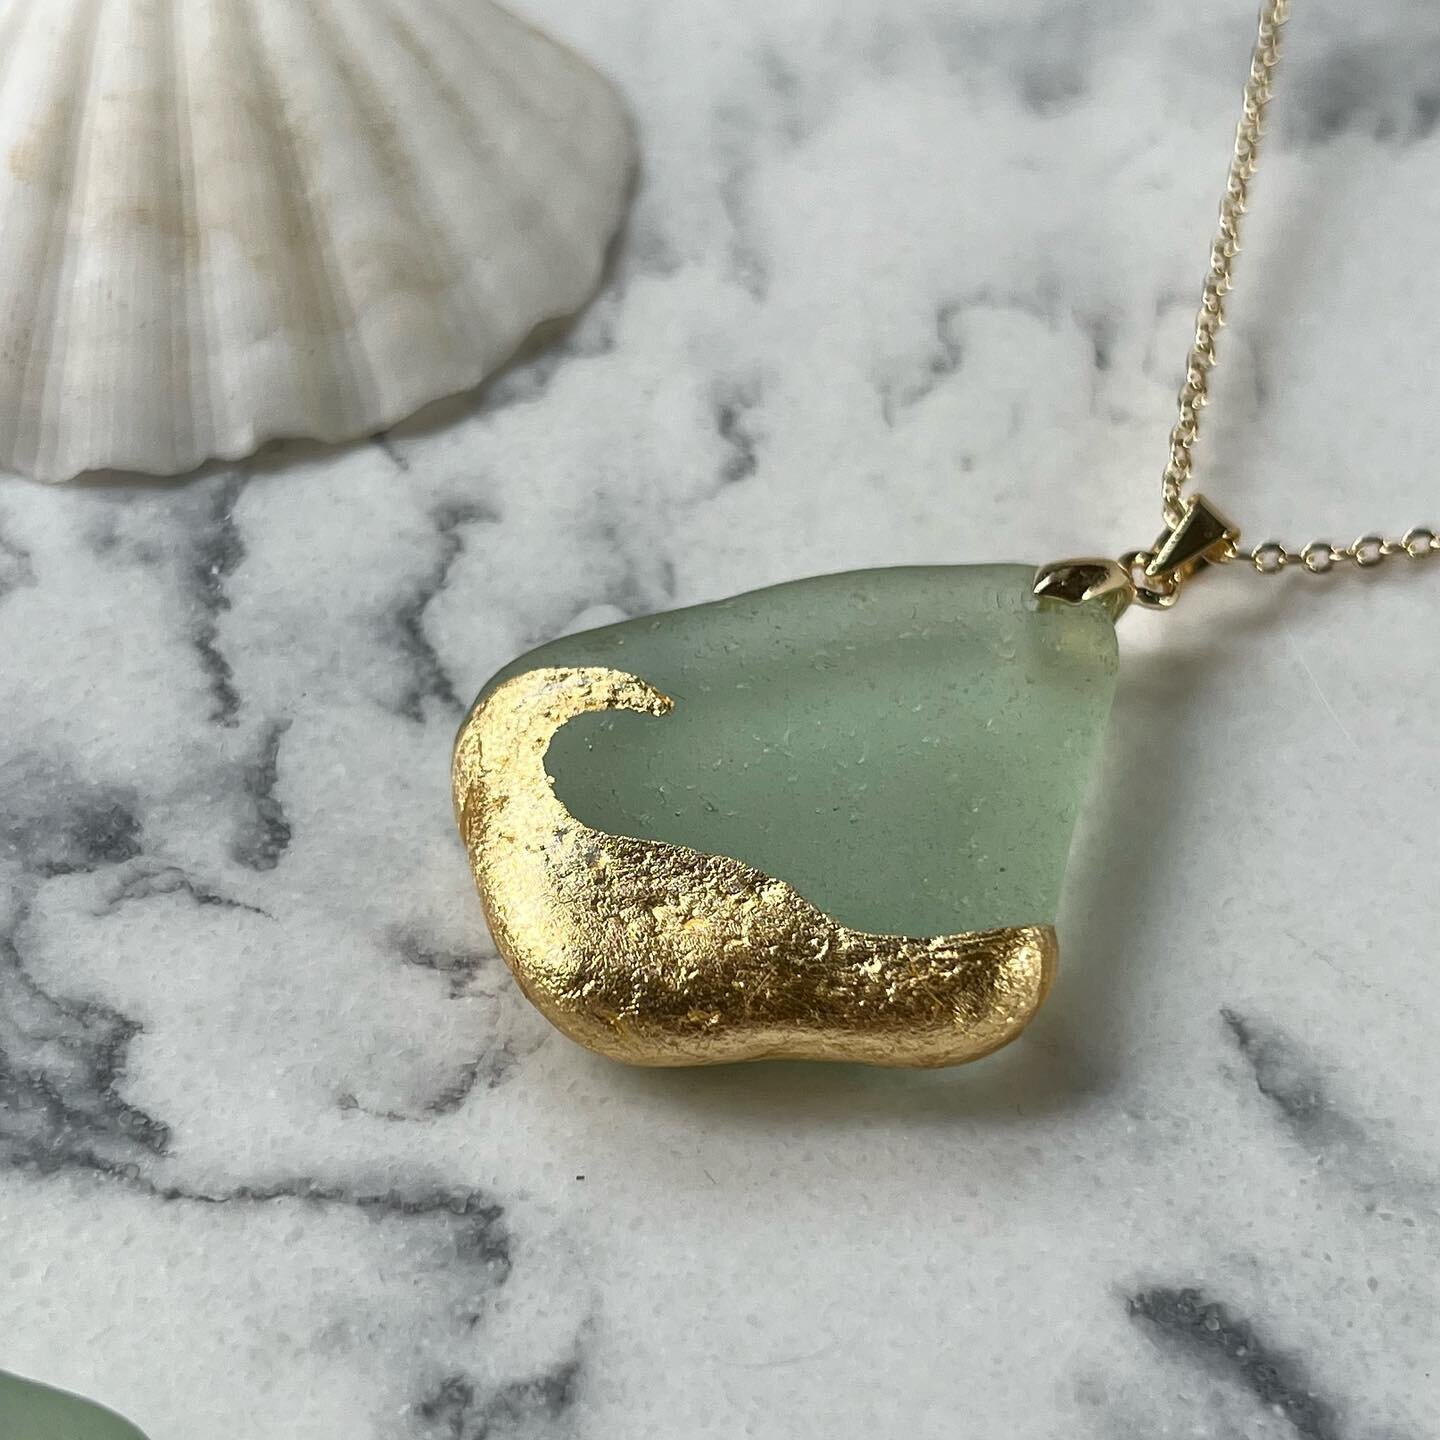 NEW STOCK 🌊

The first Seafoam collection drop of 2024 is coming Wednesday 27th March 🎊

There will be (hopefully) something for everyone:

〰️ Seafoam N*des - plain sea glass pendants
〰️ Classic Seafoam - my signature gold leaf motifs 
〰️ Seafoam e